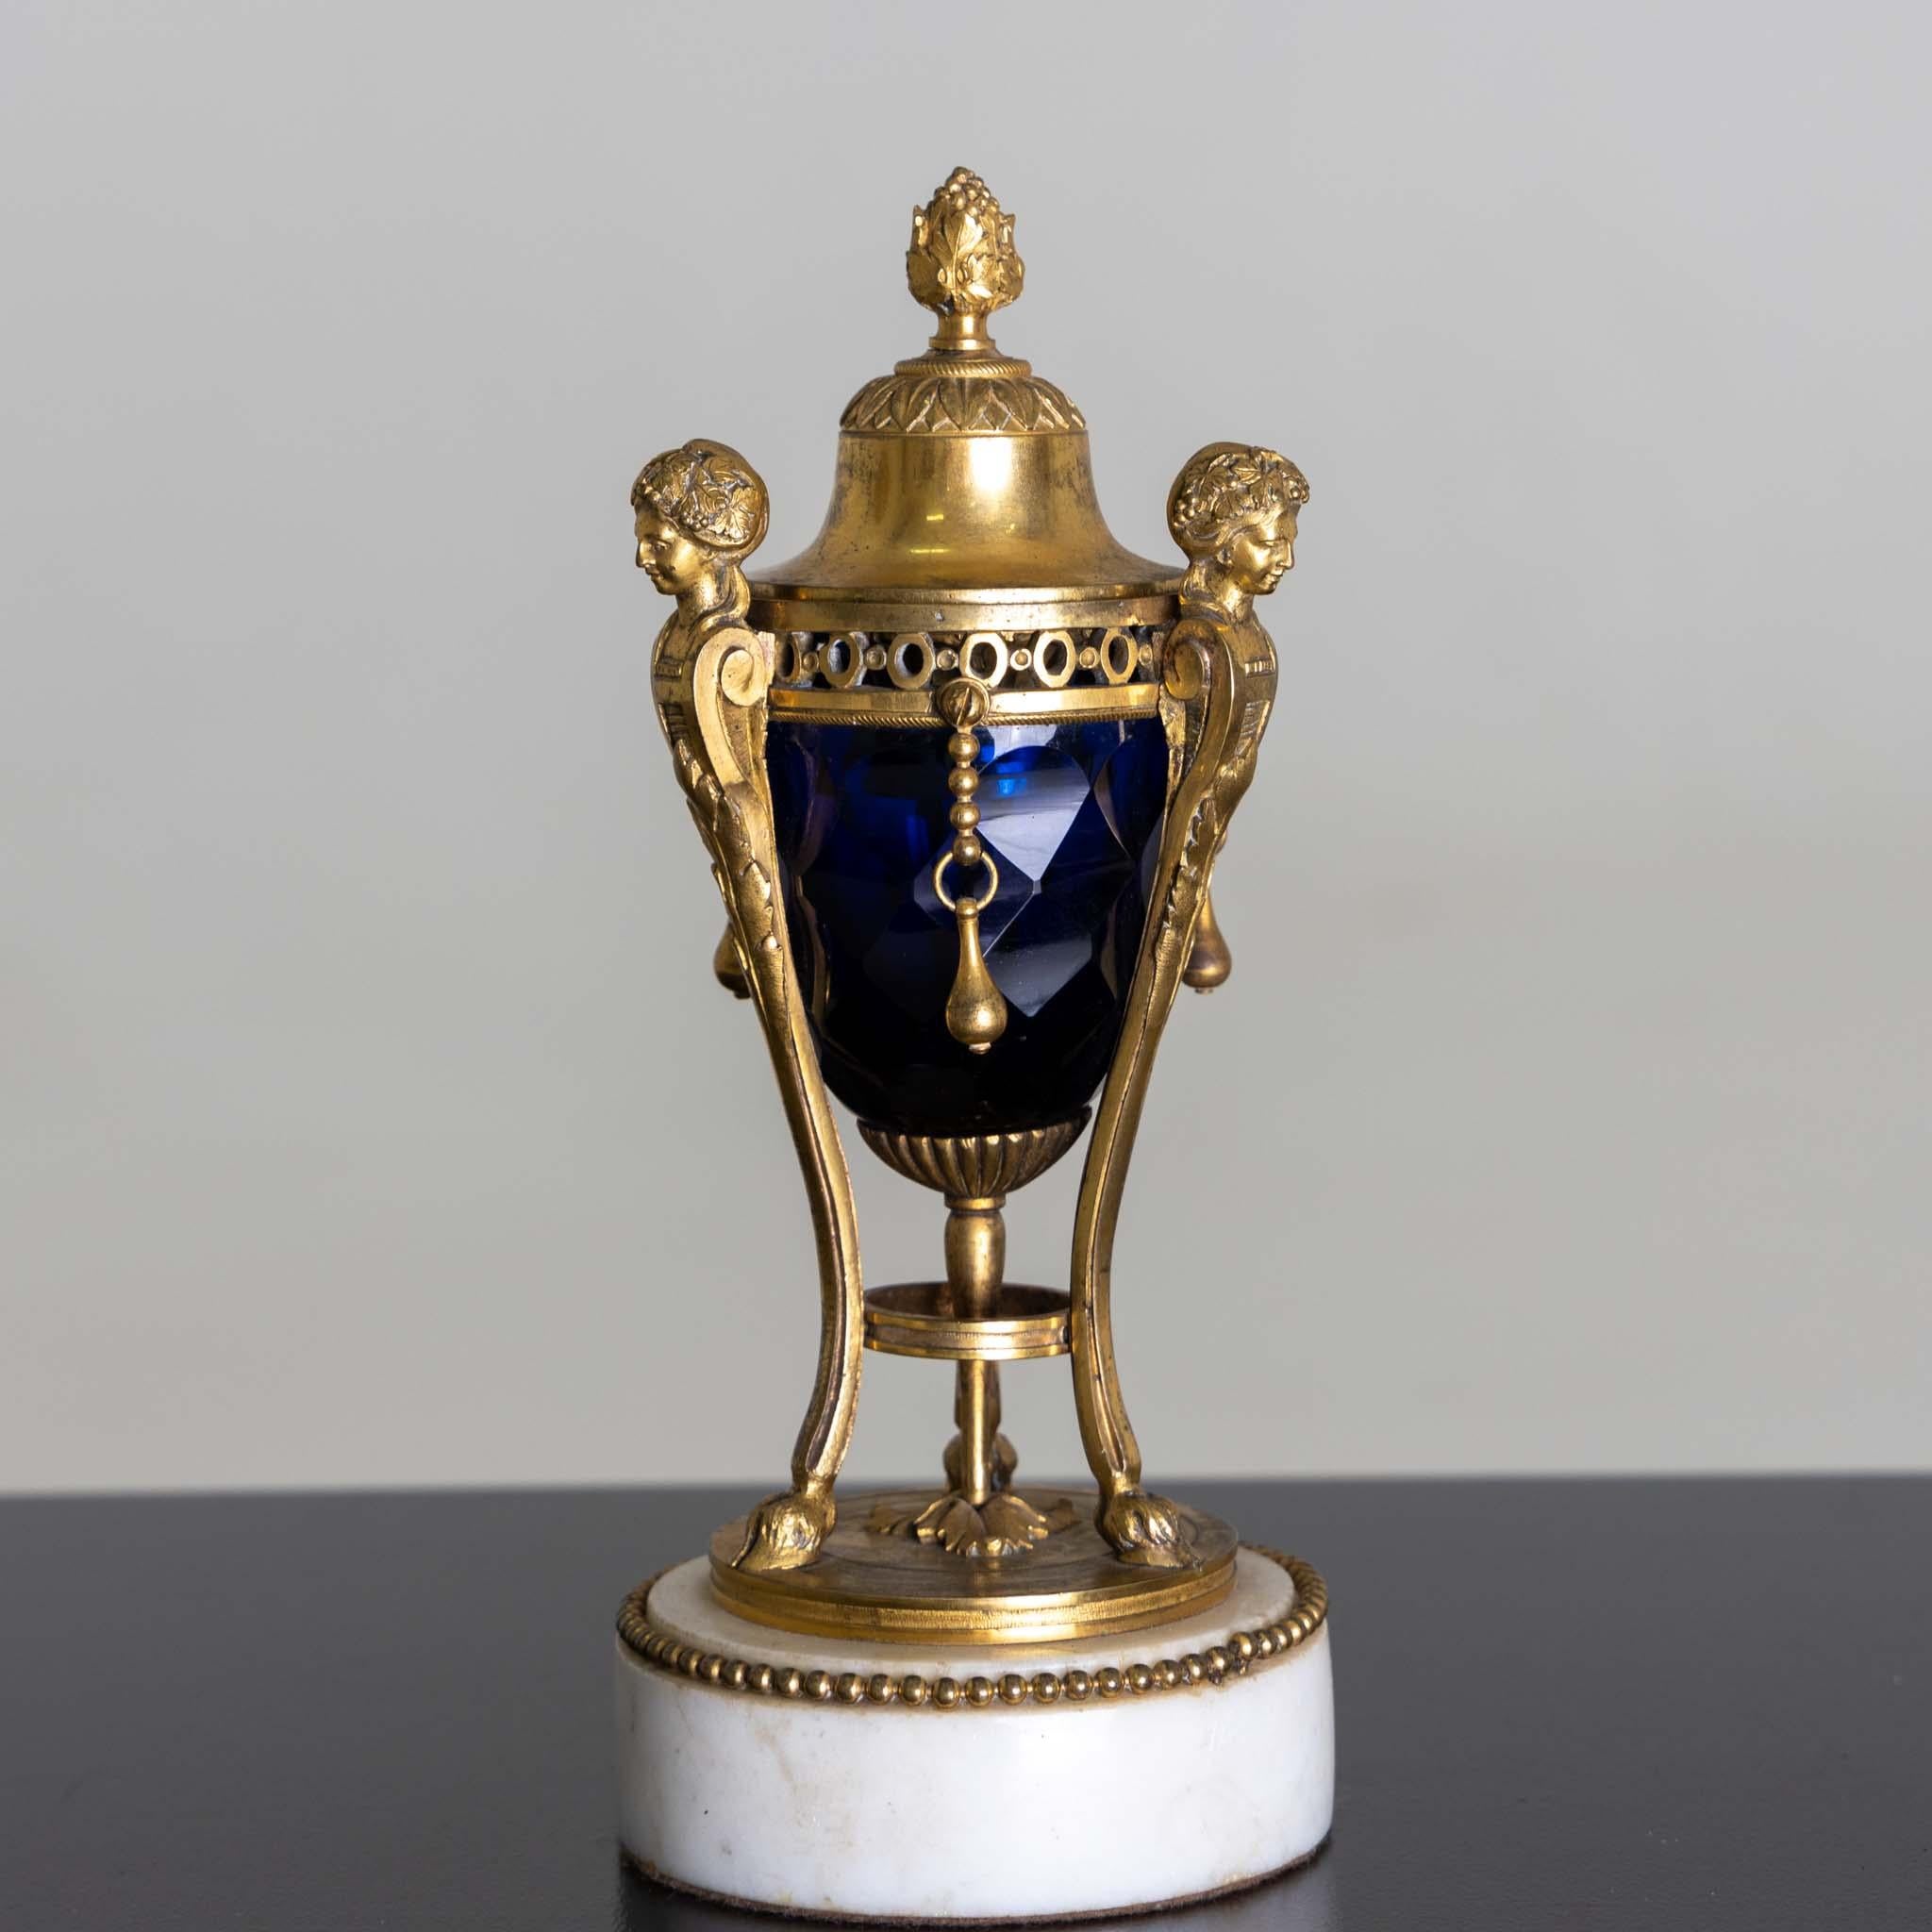 Small fire-gilt bronze candlestick with blue faceted crystal glass and marble base. Probably 